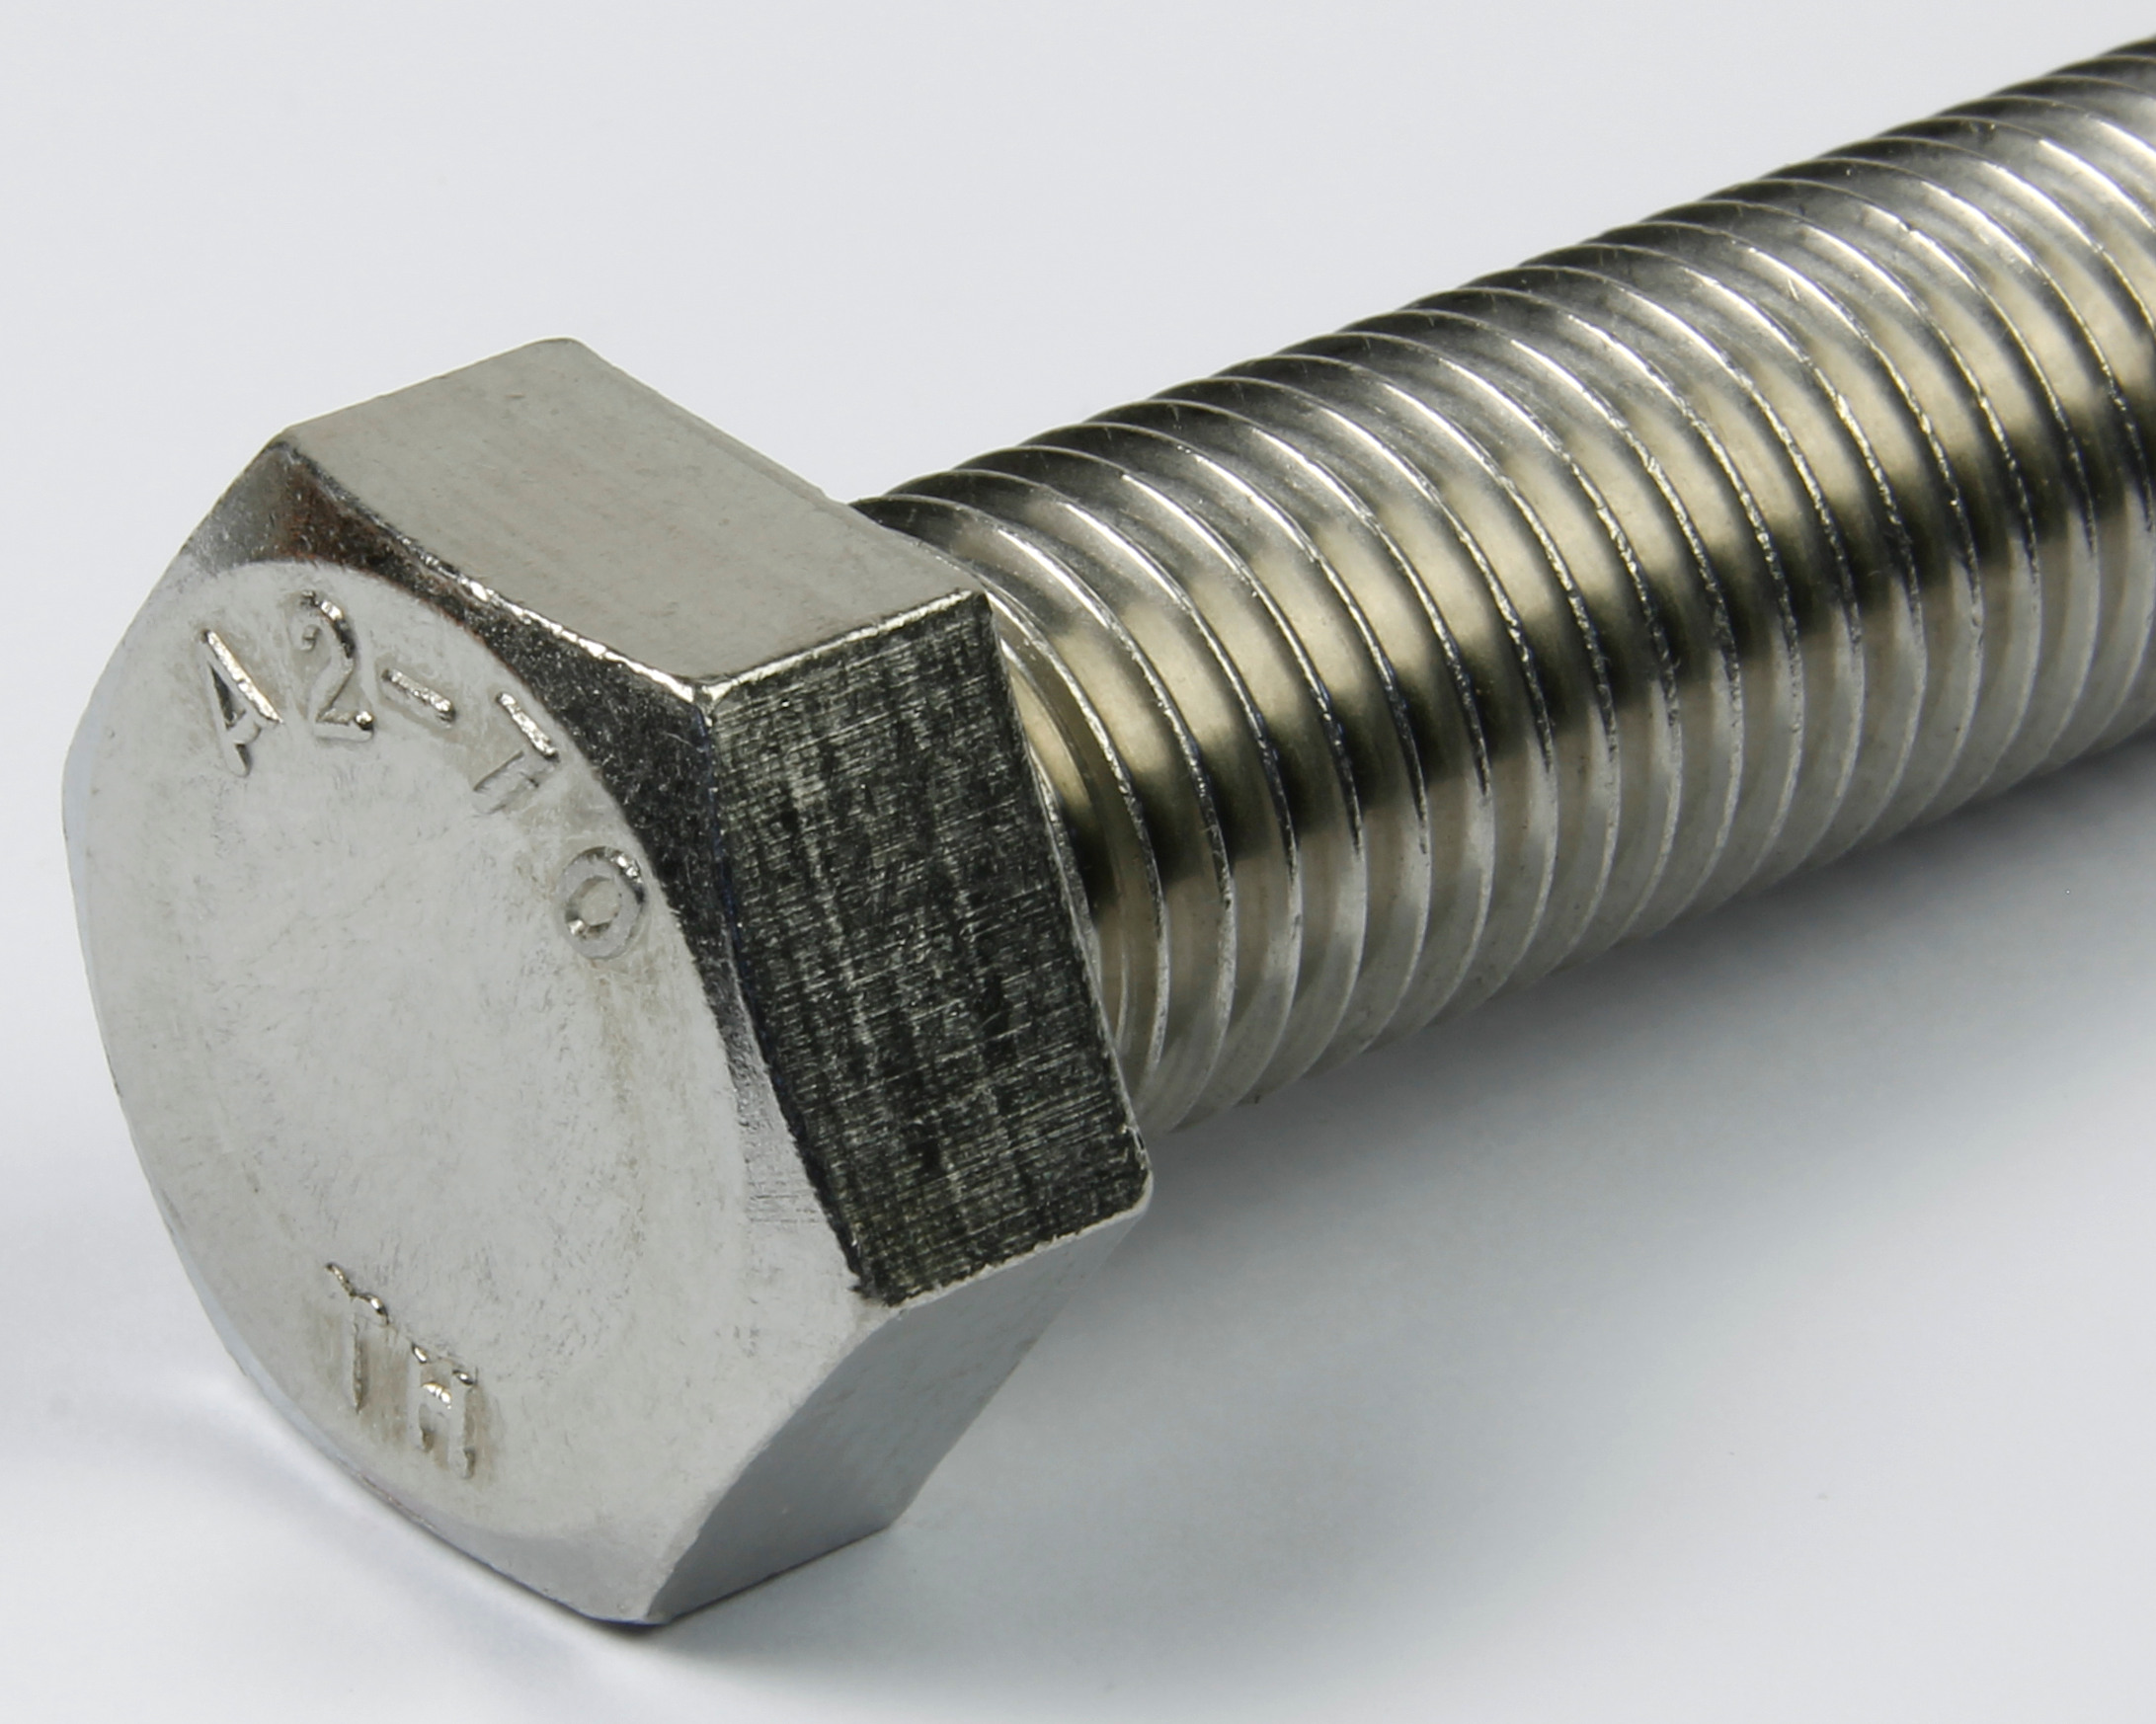 A2-70 stainless steel bolt